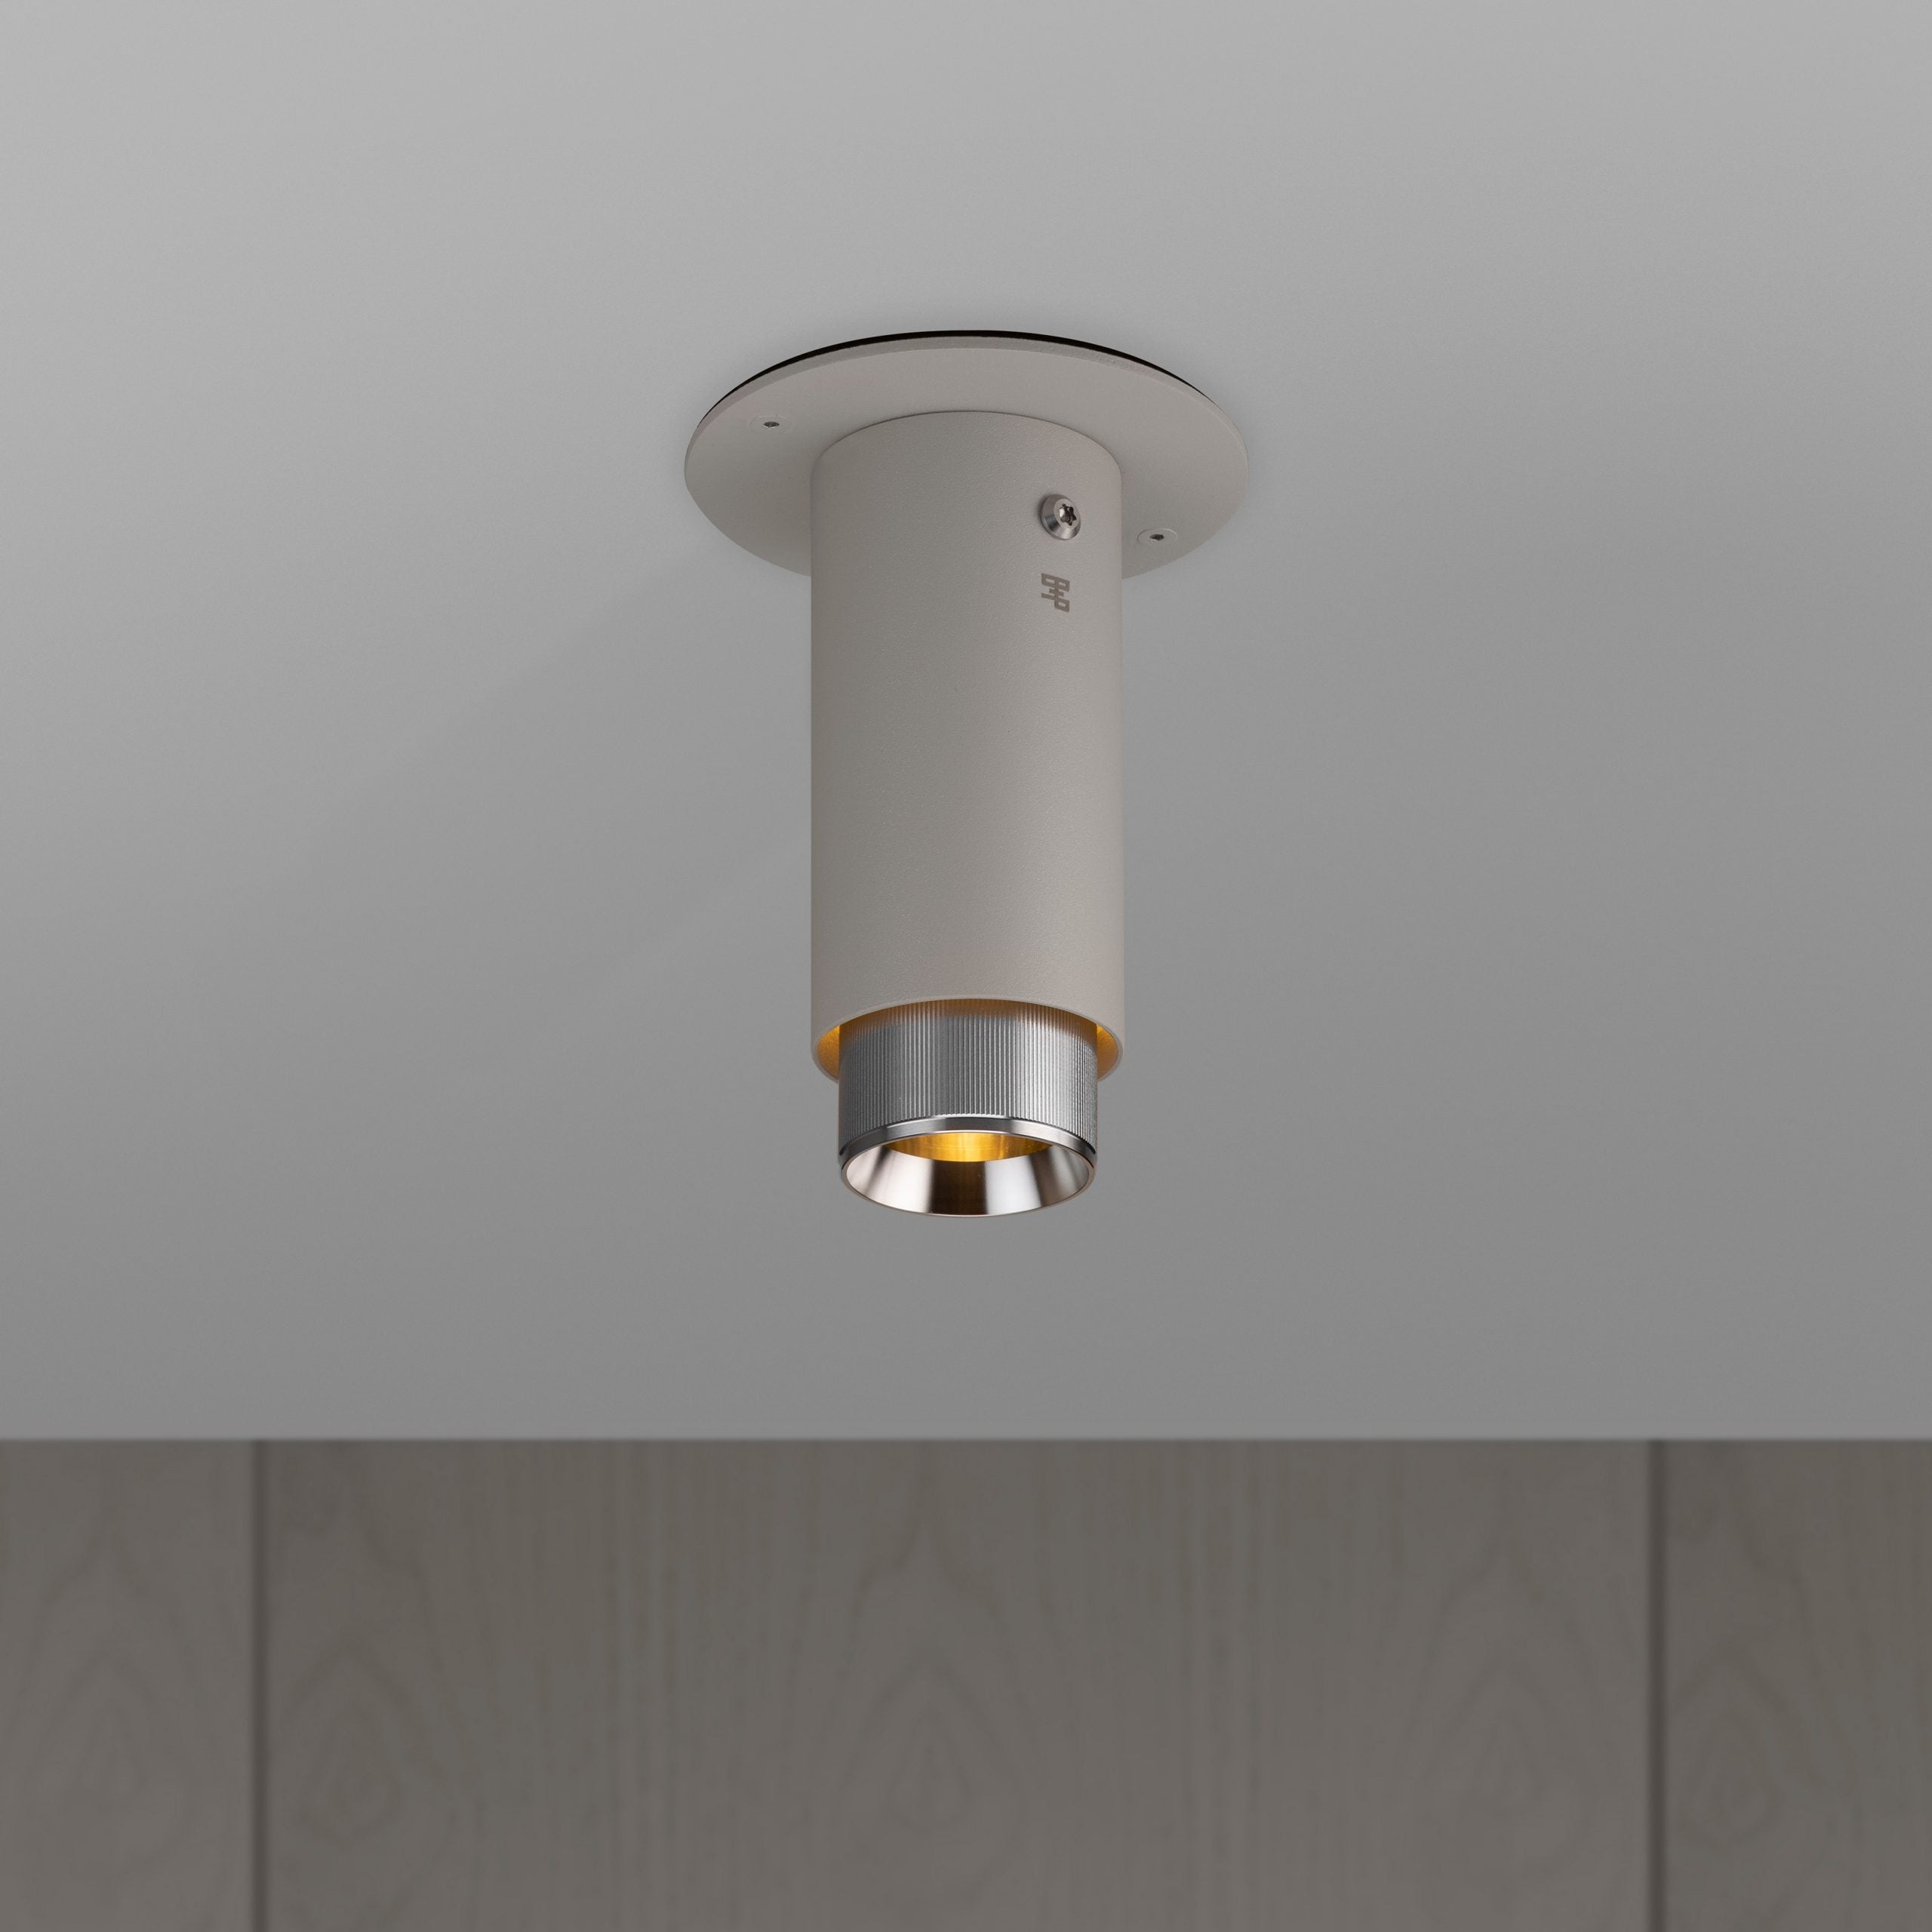 Buster + Punch Exhaust Surface Flush Mount Ceiling Light Buster + Punch Stone & Steel  